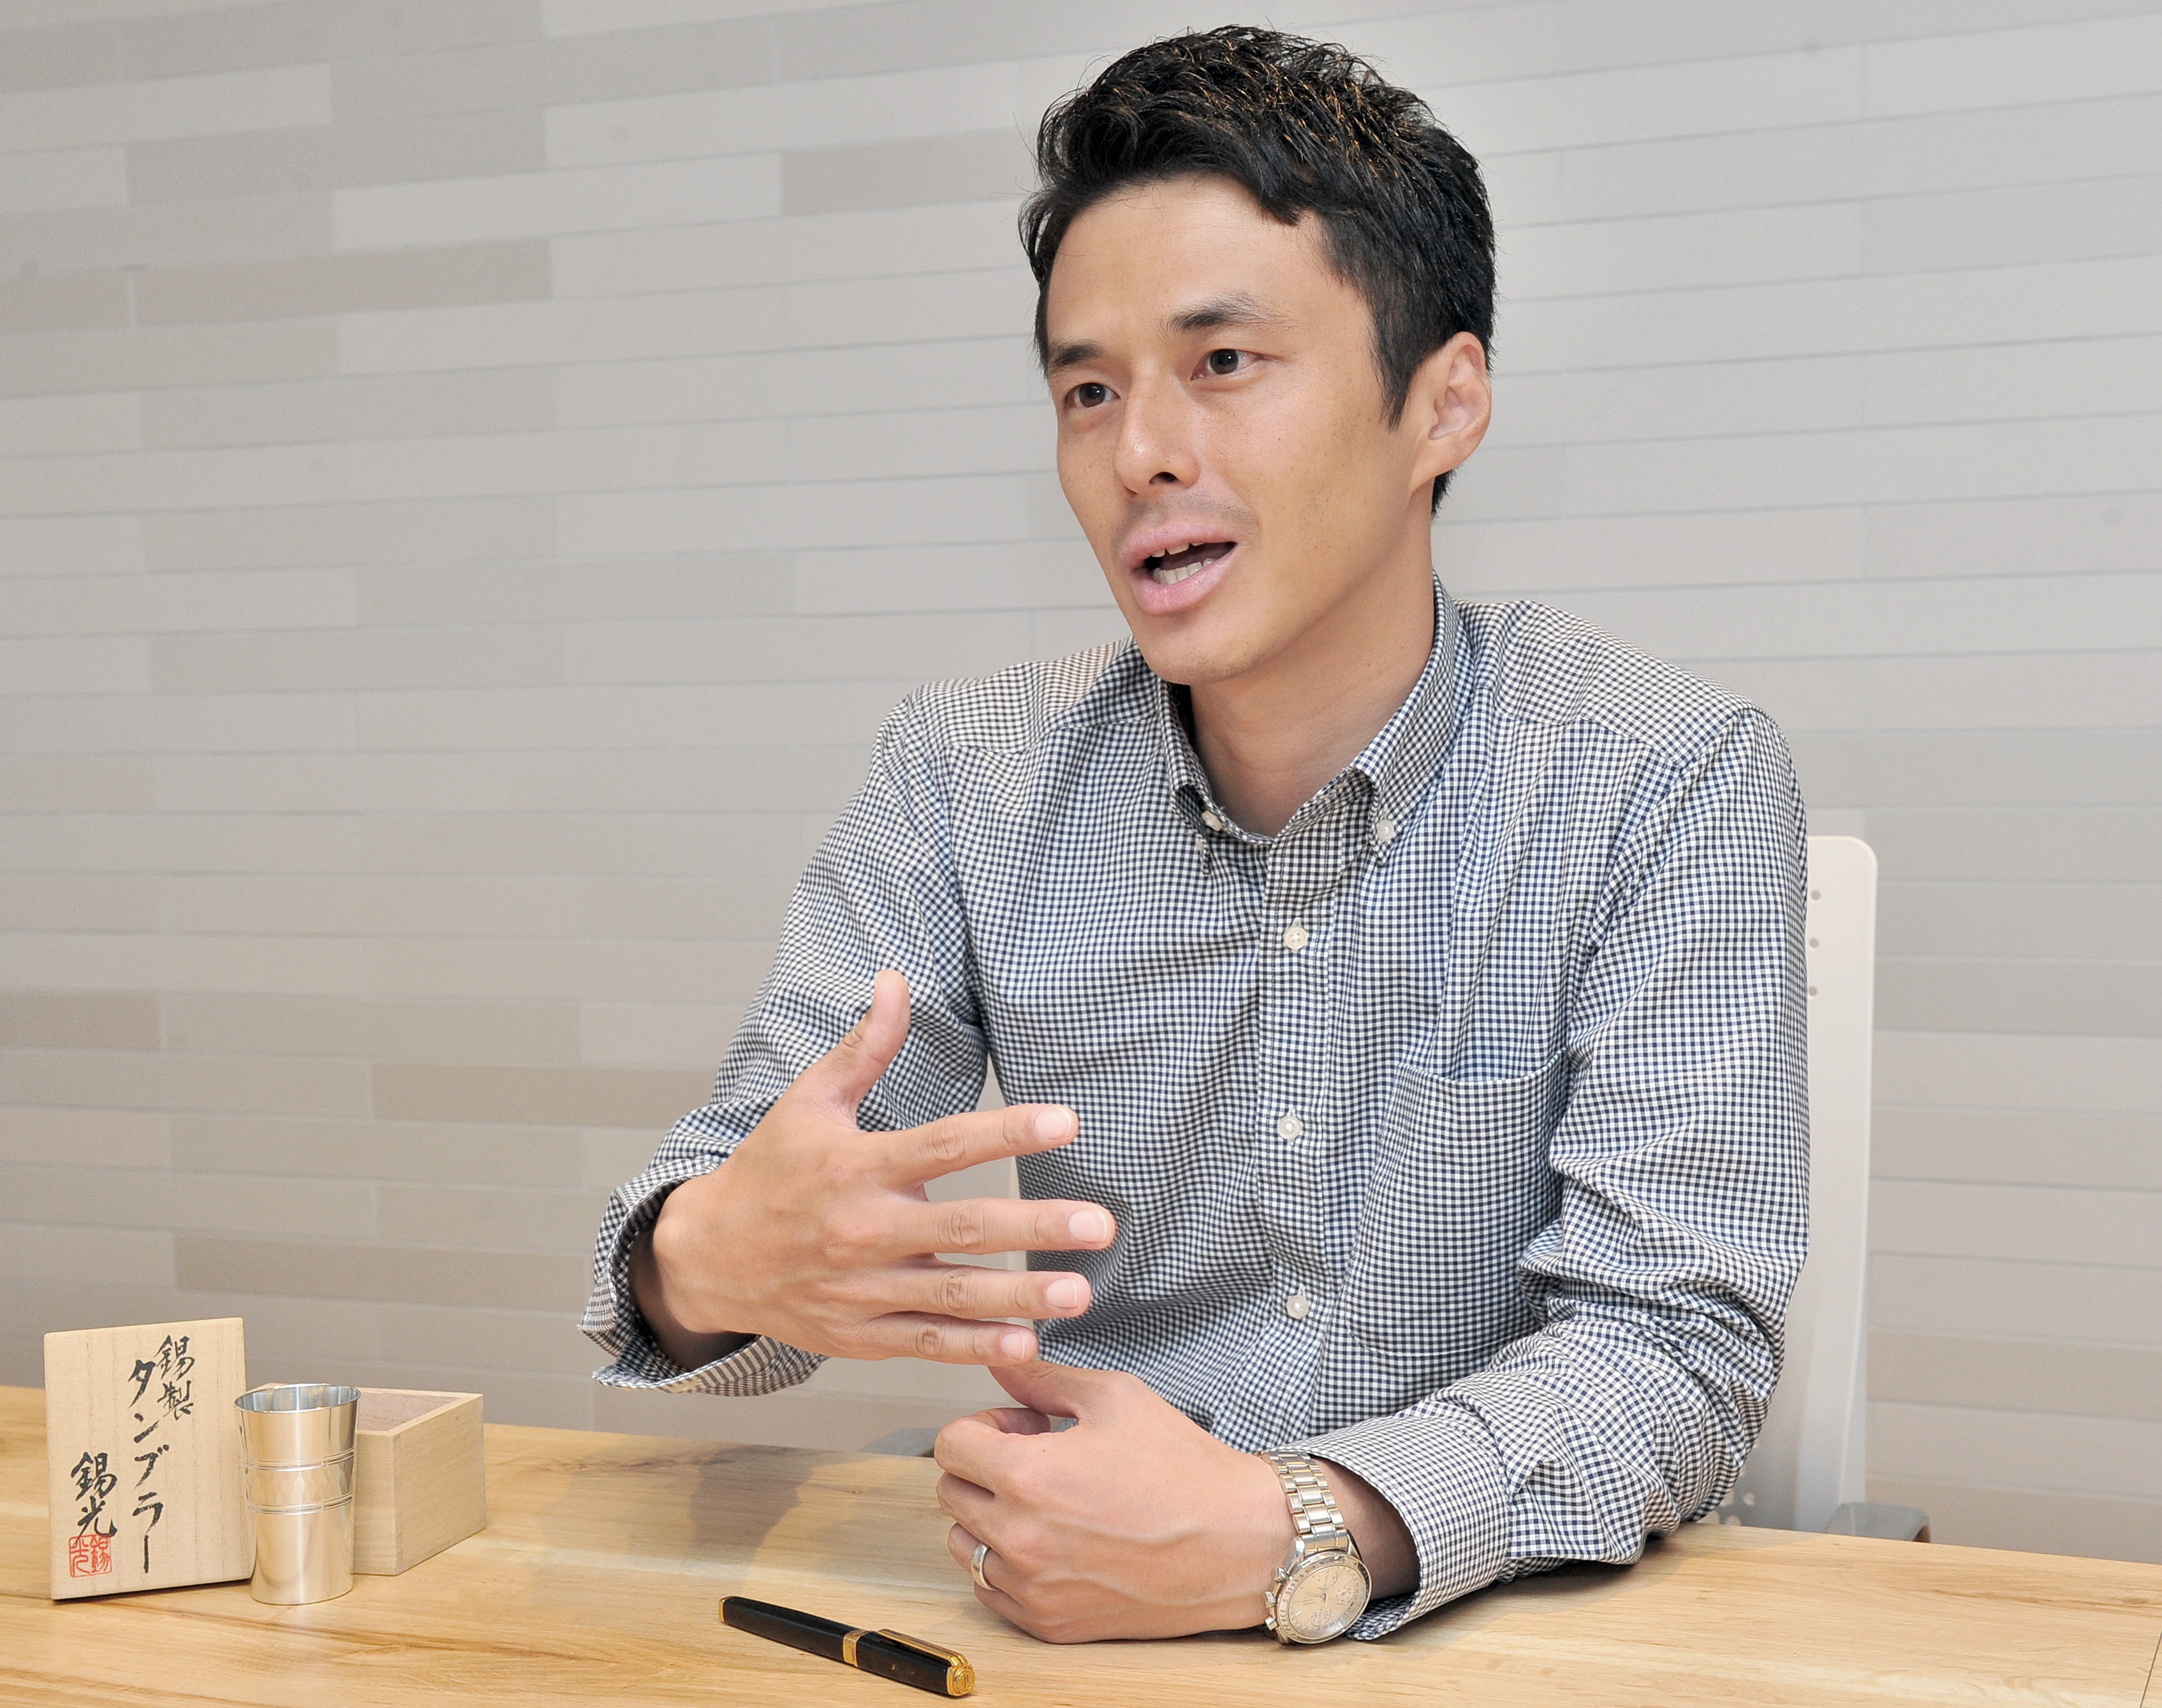 Keigo Omaki talks about his effort to document Japan's traditional craftsmen online, during an interview in Tokyo on Aug. 25. Before him is a pewter cup made by Keiichi Nakamura, one of the craftsmen featured in the video project. | YOSHIAKI MIURA